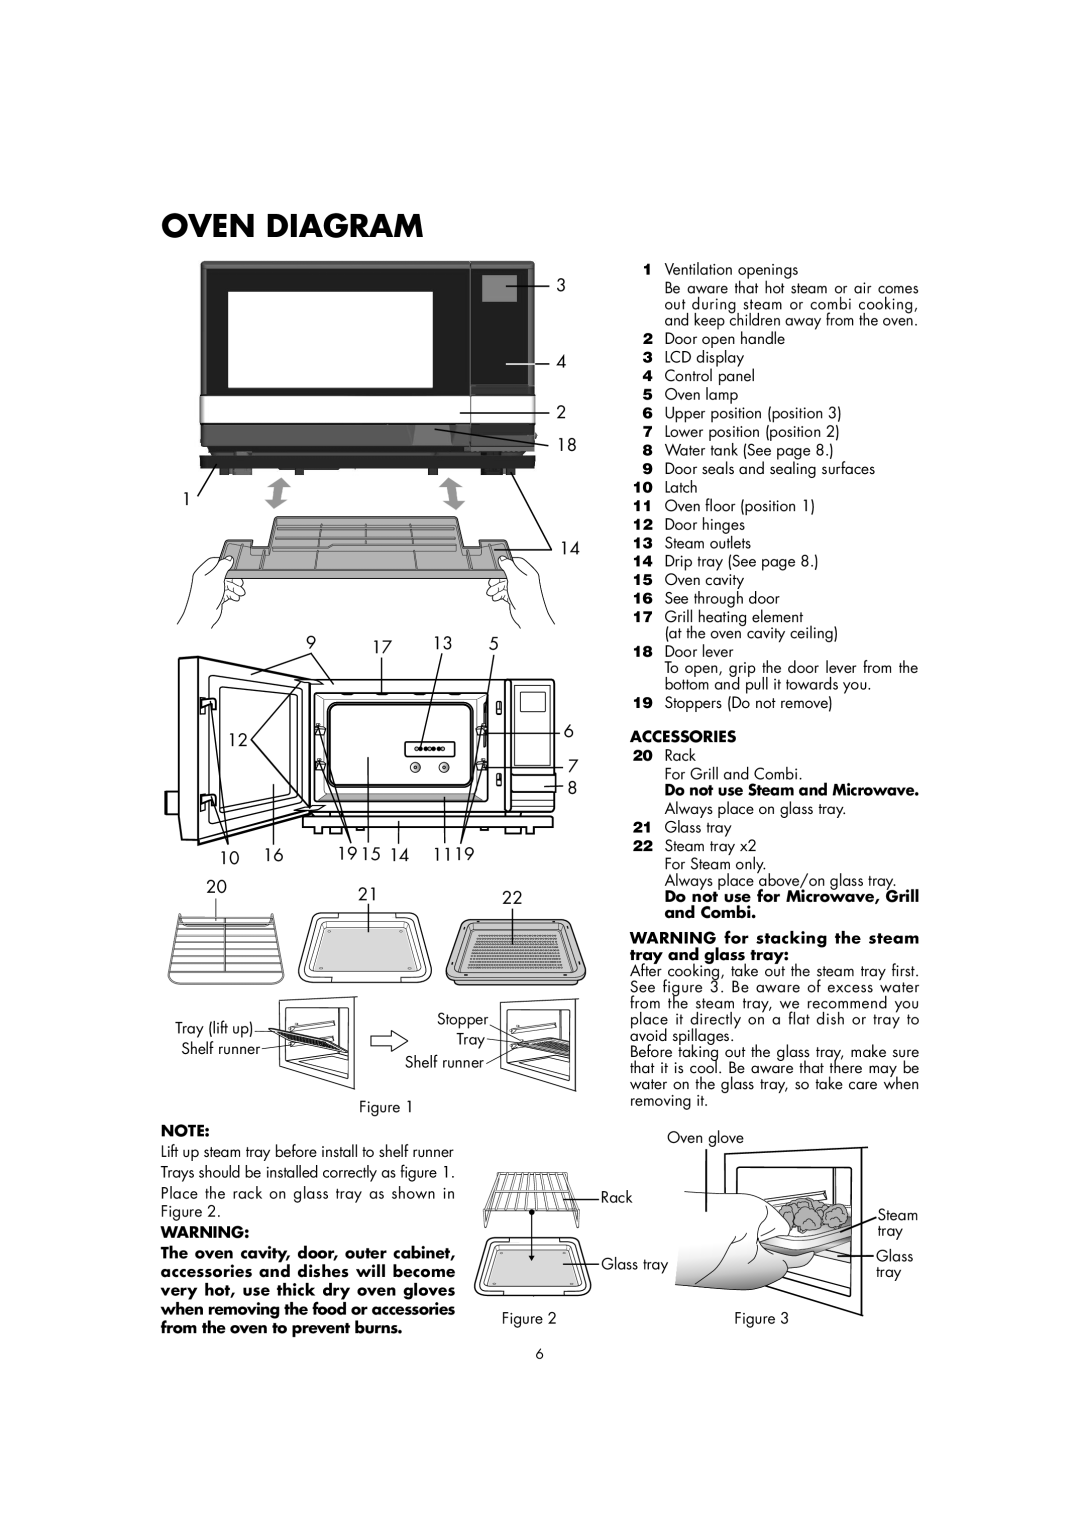 Sharp AX-1110(SL)M Oven Diagram, Accessories, Do not use for Microwave, Grill and Combi, from the oven to prevent burns 